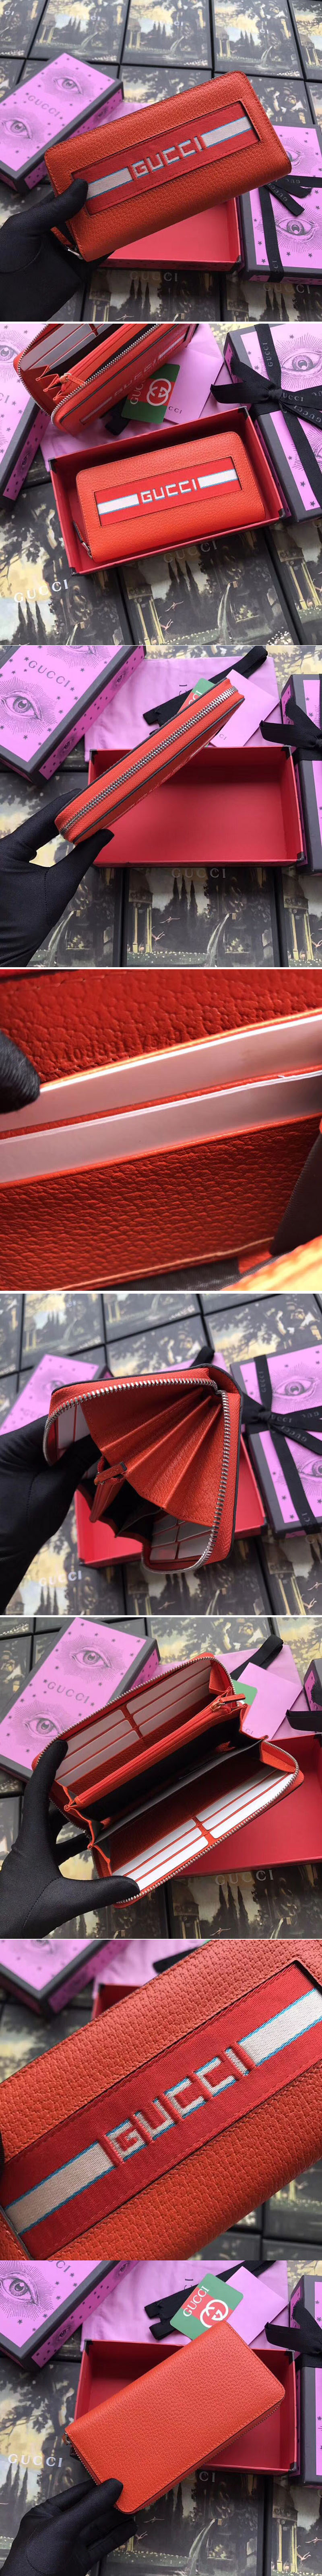 Replica Gucci 408831 Original Calfskin Leather With Print Zip Around Wallet Red